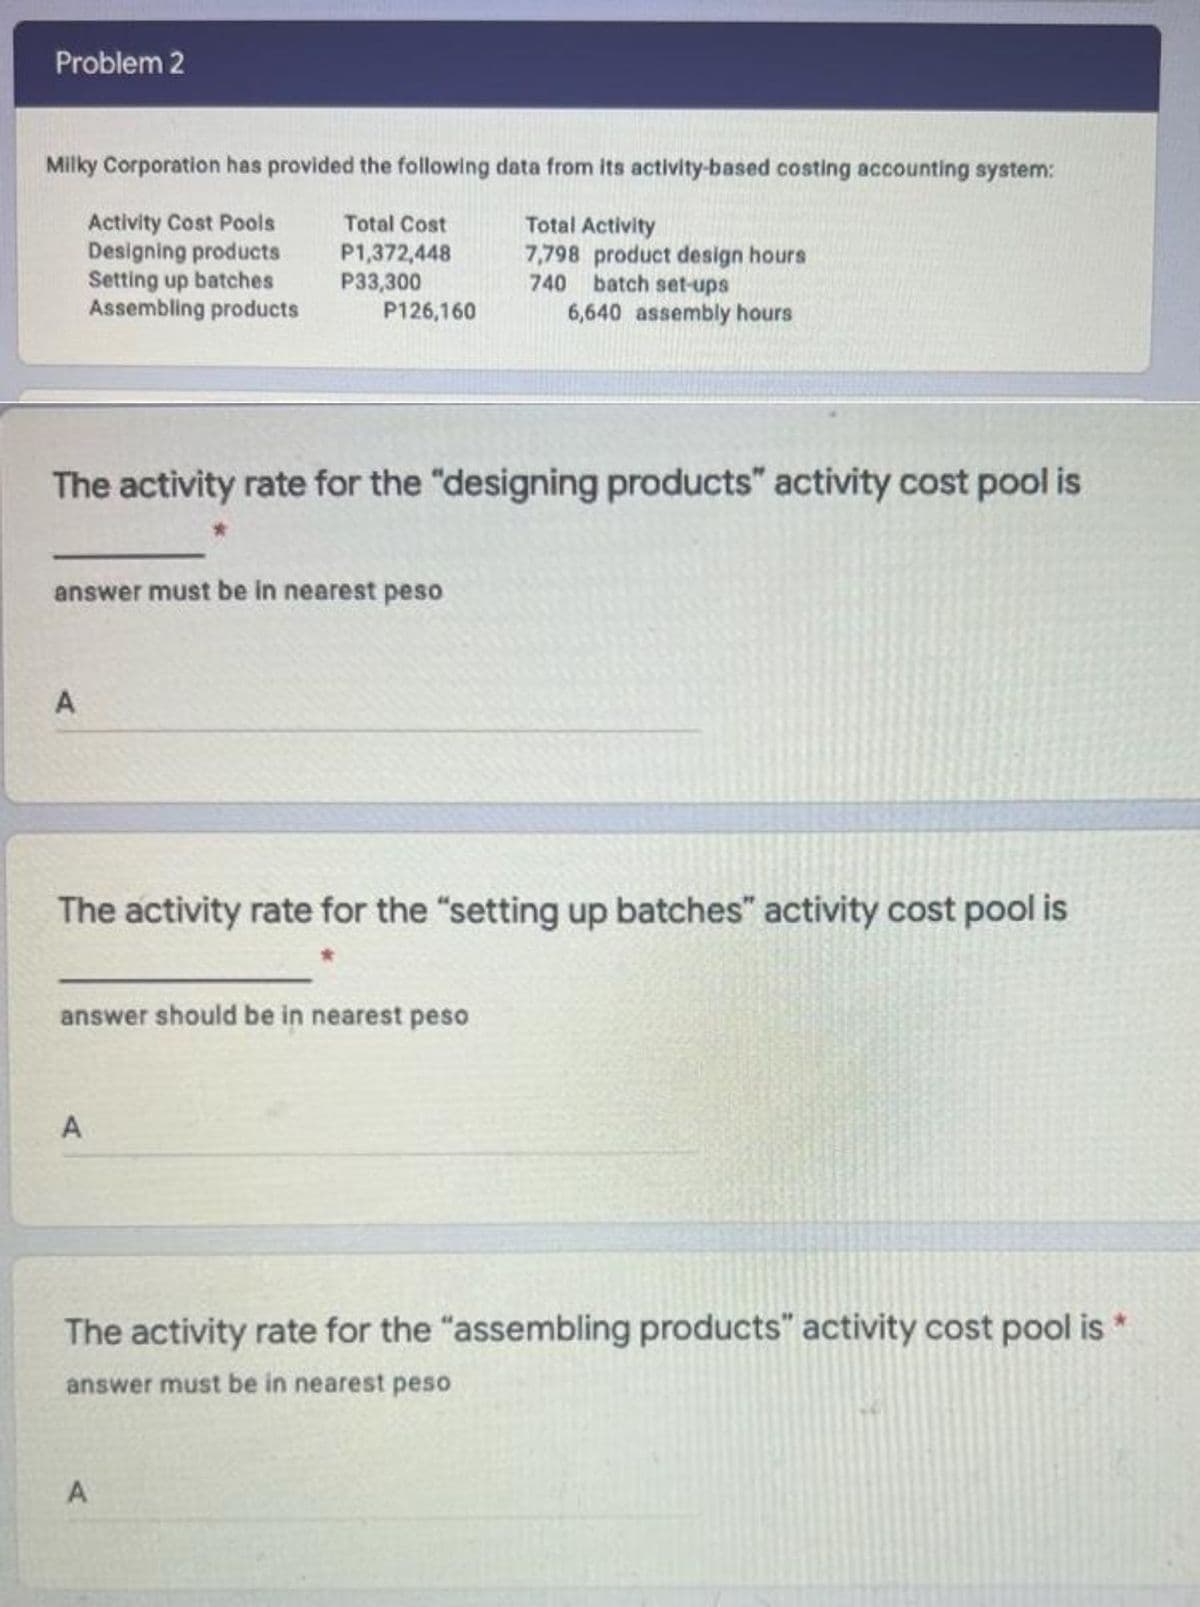 Problem 2
Milky Corporation has provided the following data from its activity-based costing accounting system:
Activity Cost Pools
Designing products
Setting up batches
Assembling products
Total Cost
P1,372,448
P33,300
P126,160
Total Activity
7,798 product design hours
740 batch set-ups
6,640 assembly hours
The activity rate for the "designing products" activity cost pool is
answer must be in nearest peso
A
The activity rate for the "setting up batches" activity cost pool is
answer should be in nearest peso
A
The activity rate for the "assembling products" activity cost pool is
answer must be in nearest peso
A
